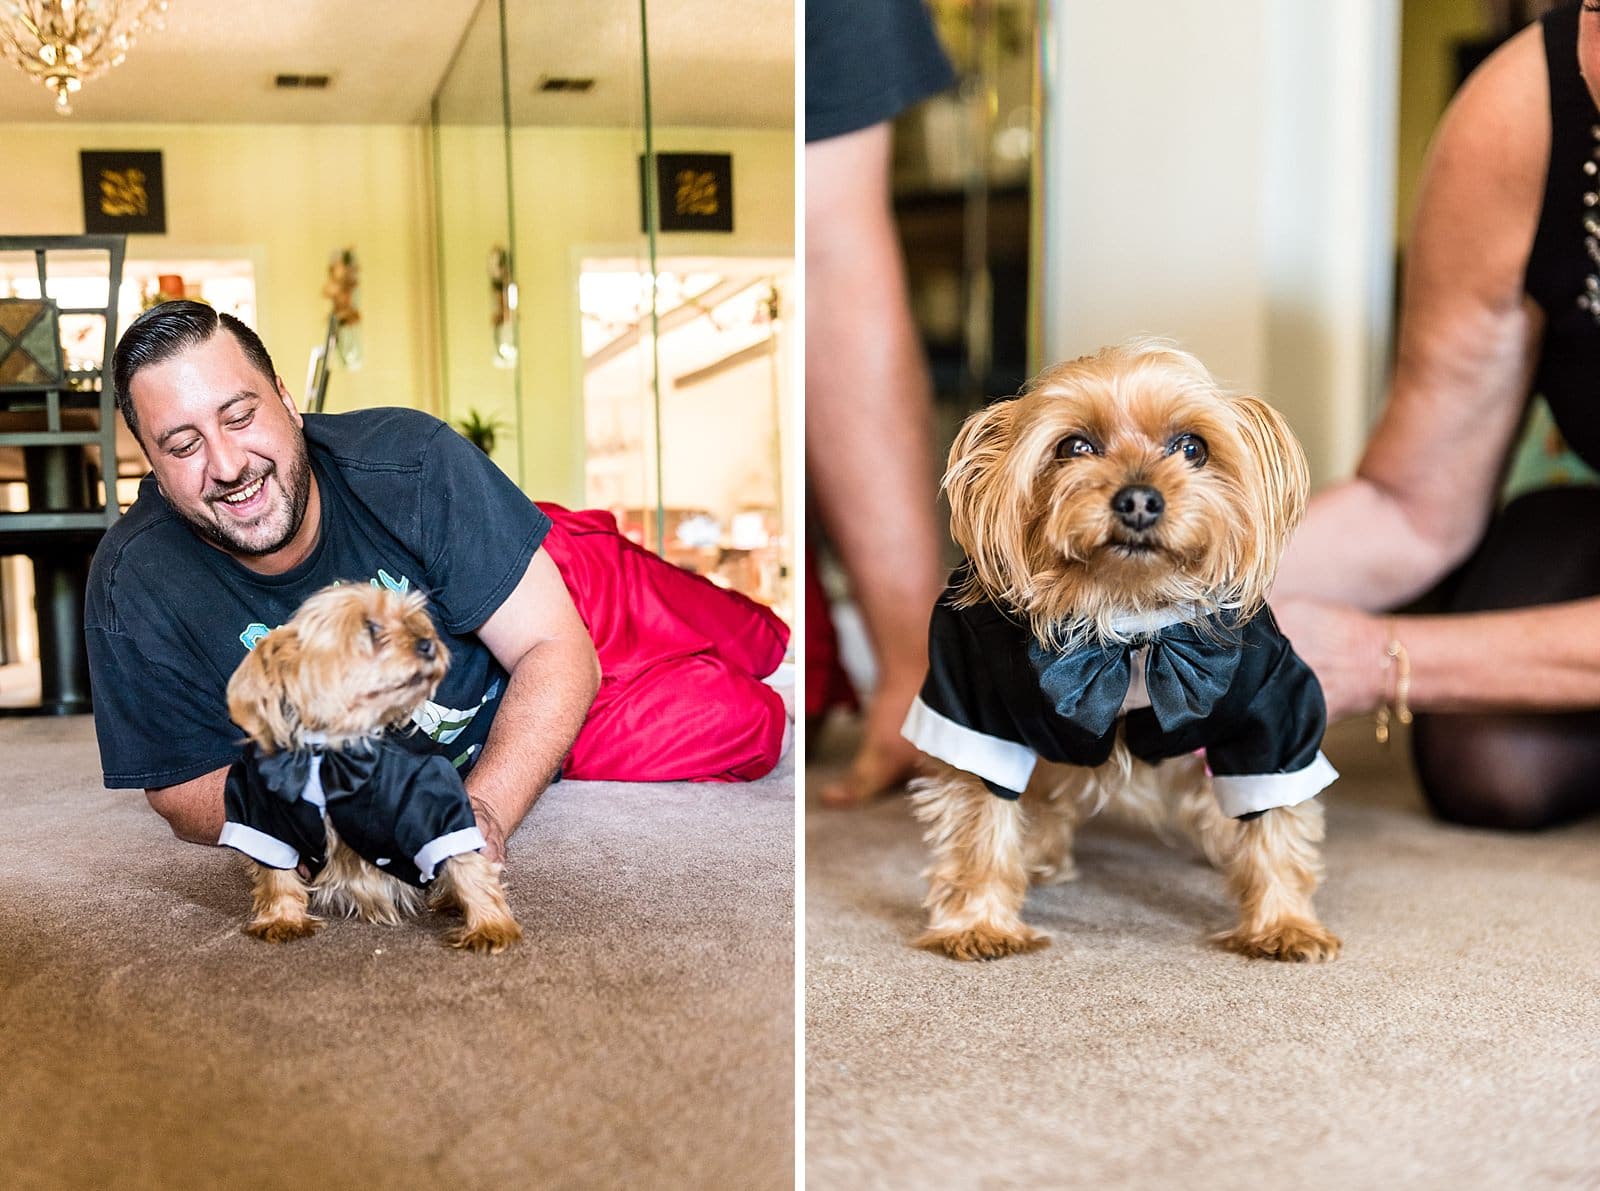 Groom gets his dog ready in a dog tuxedo